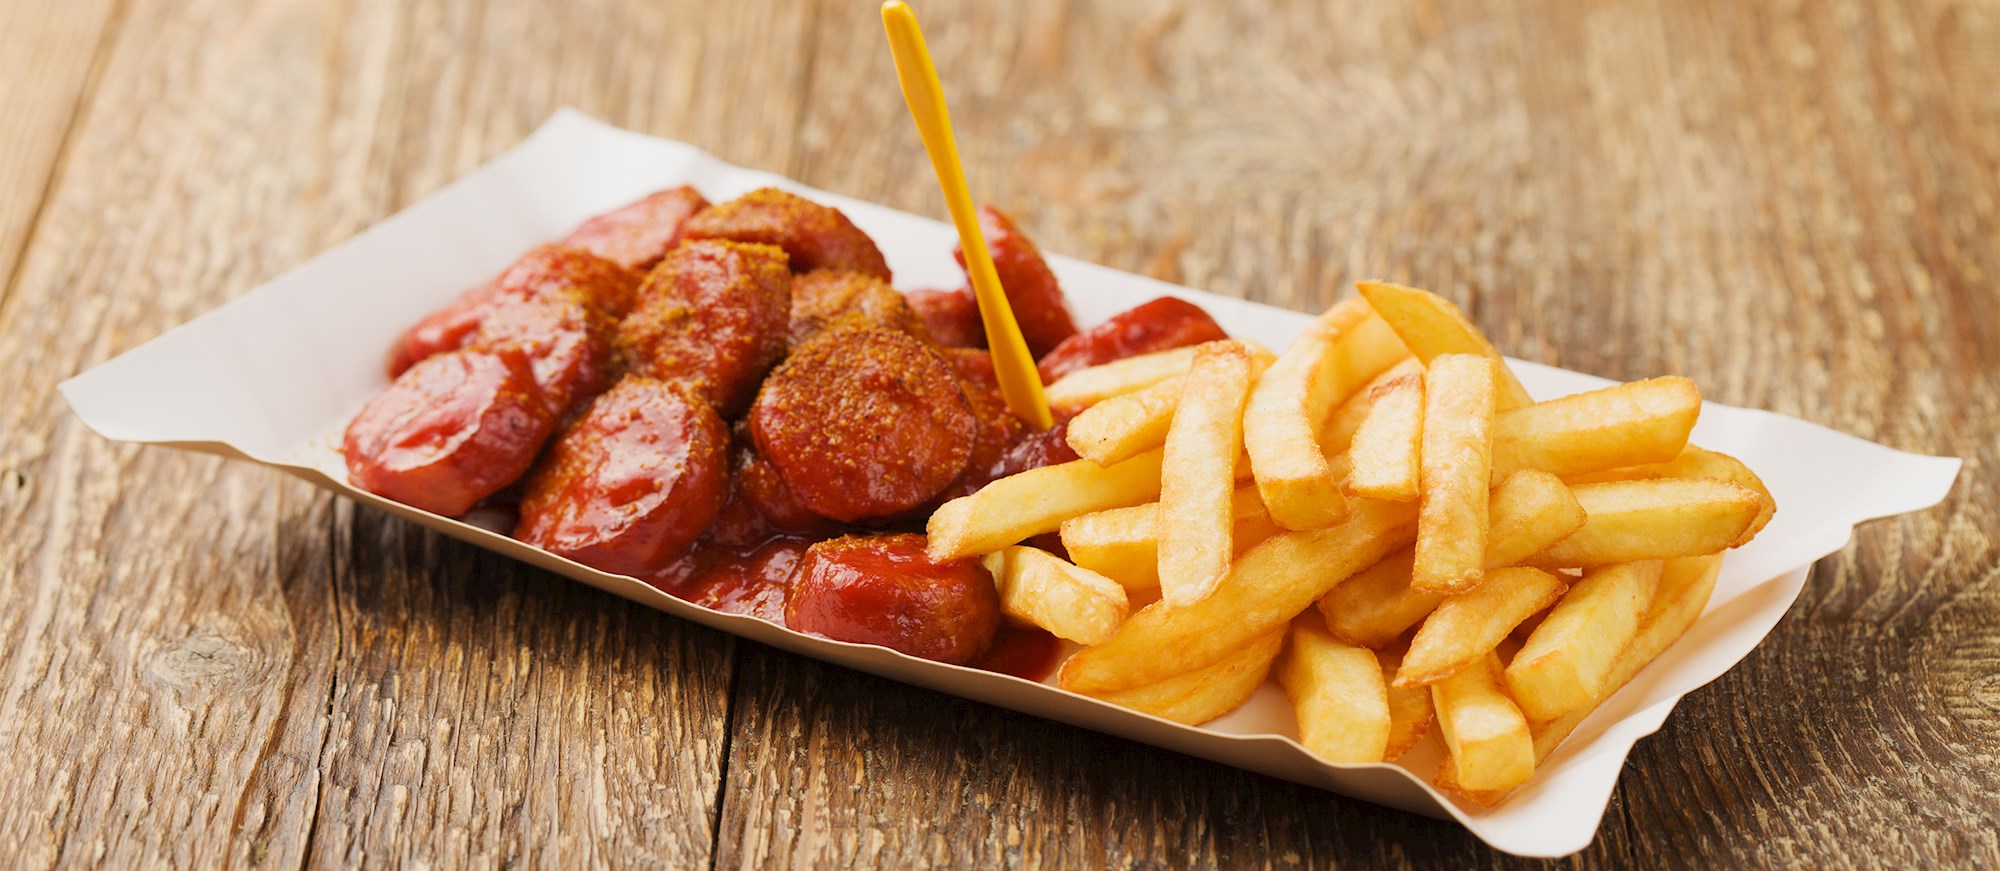 Where to Eat the Best Currywurst in the World? | TasteAtlas